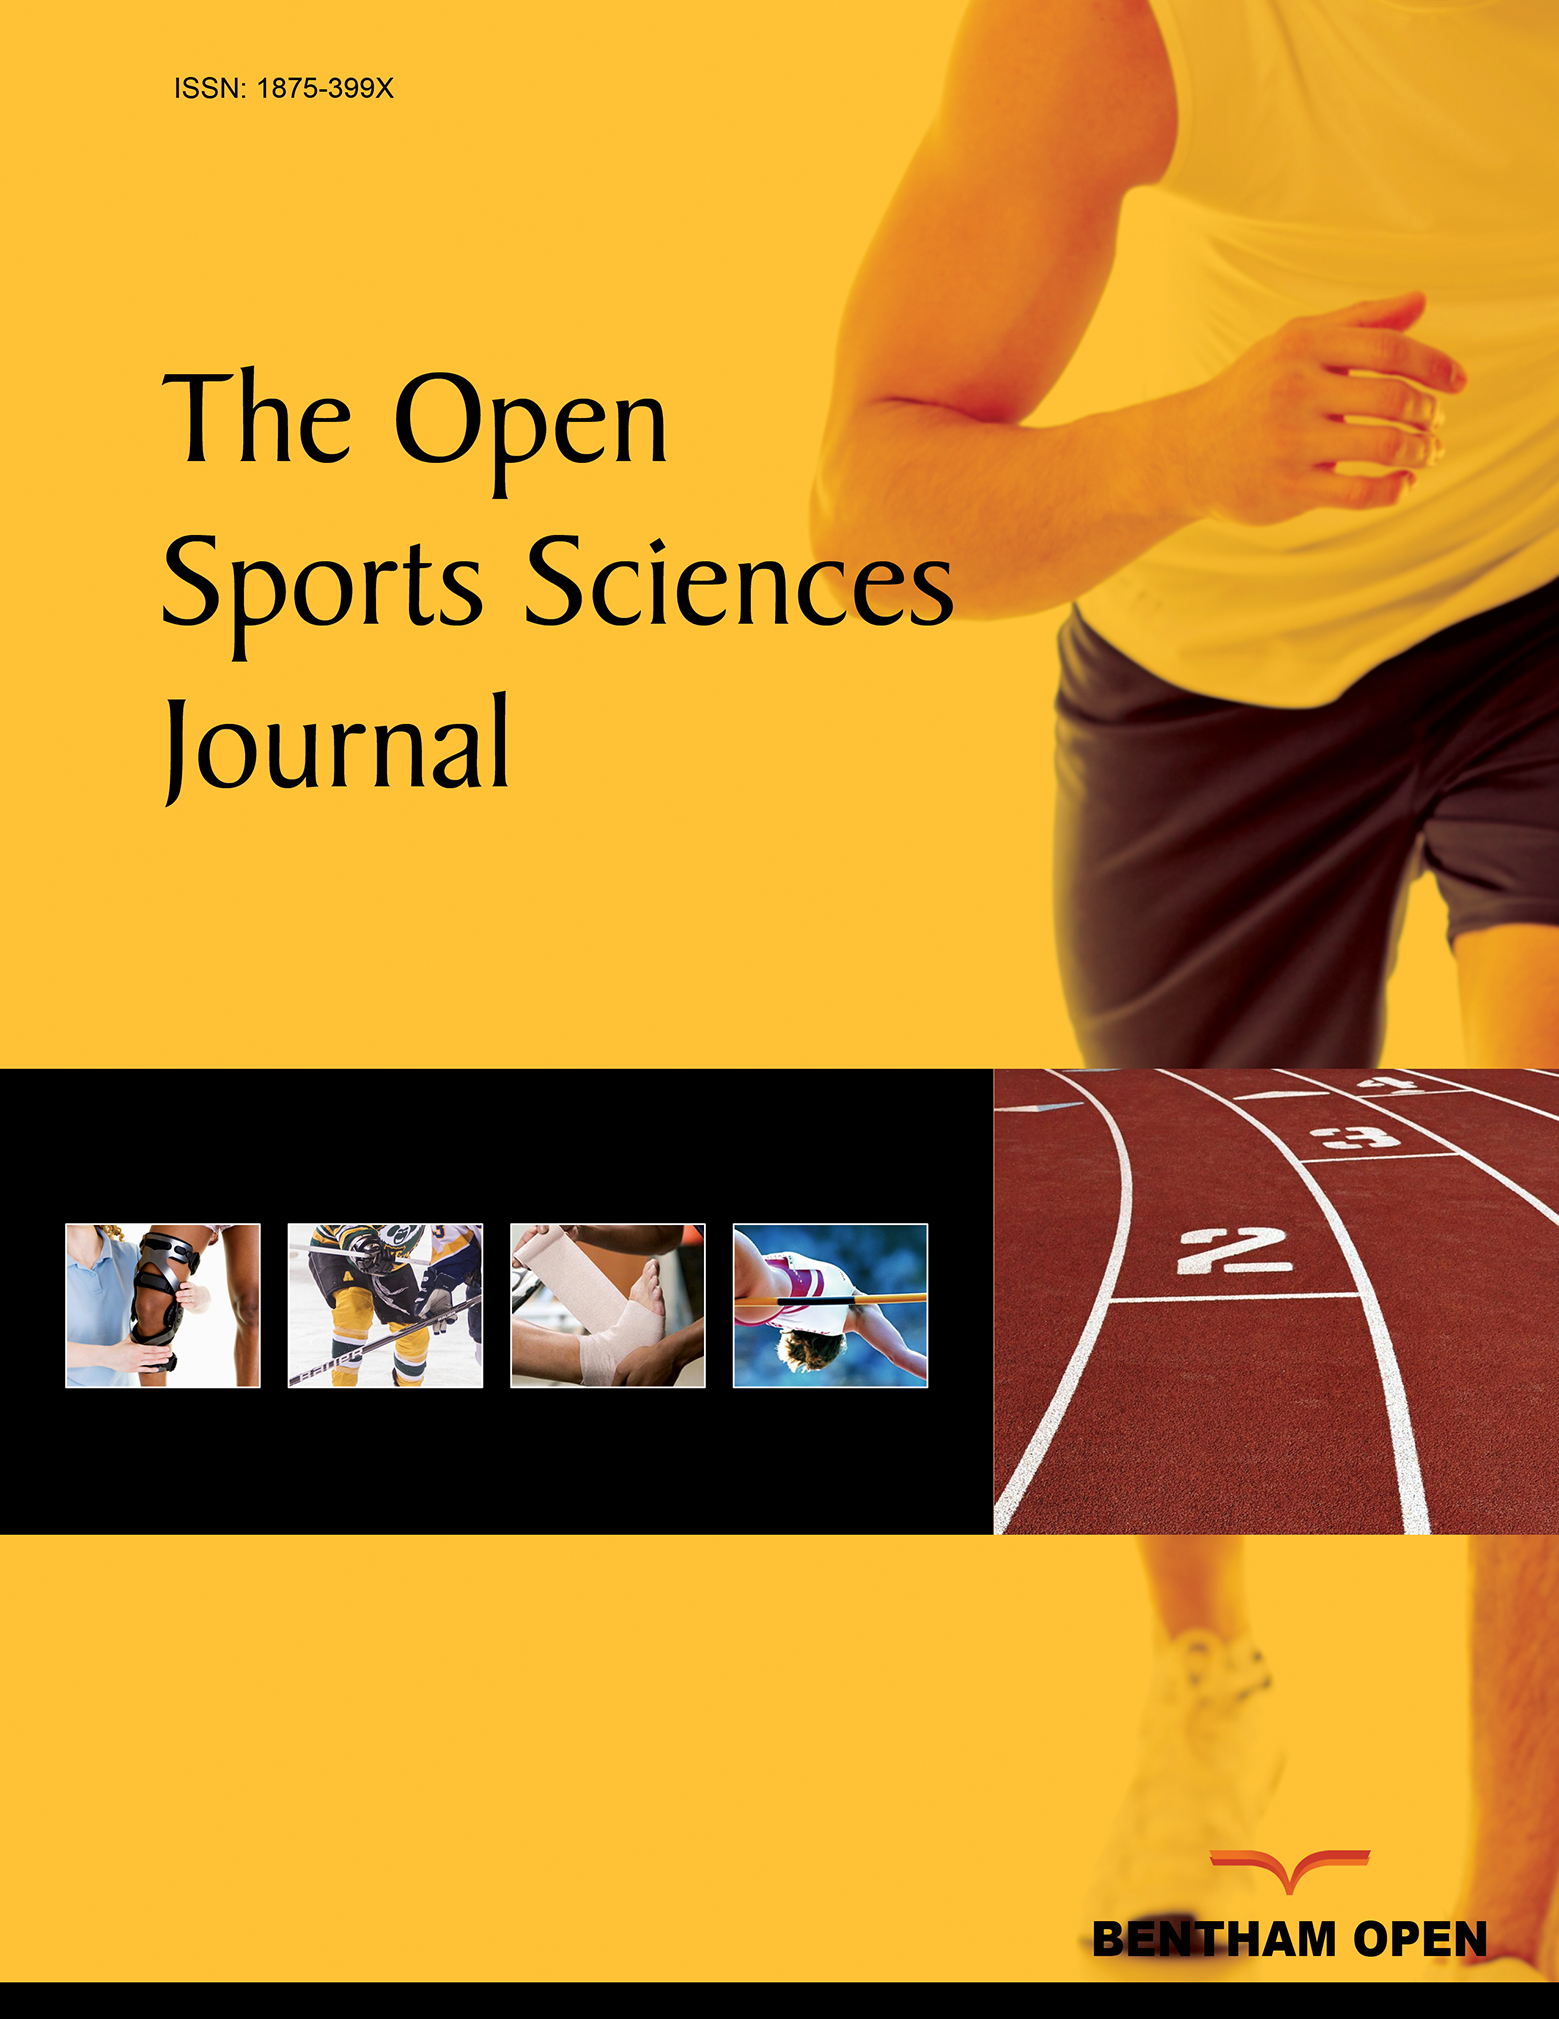 The Open Sports Sciences Journal